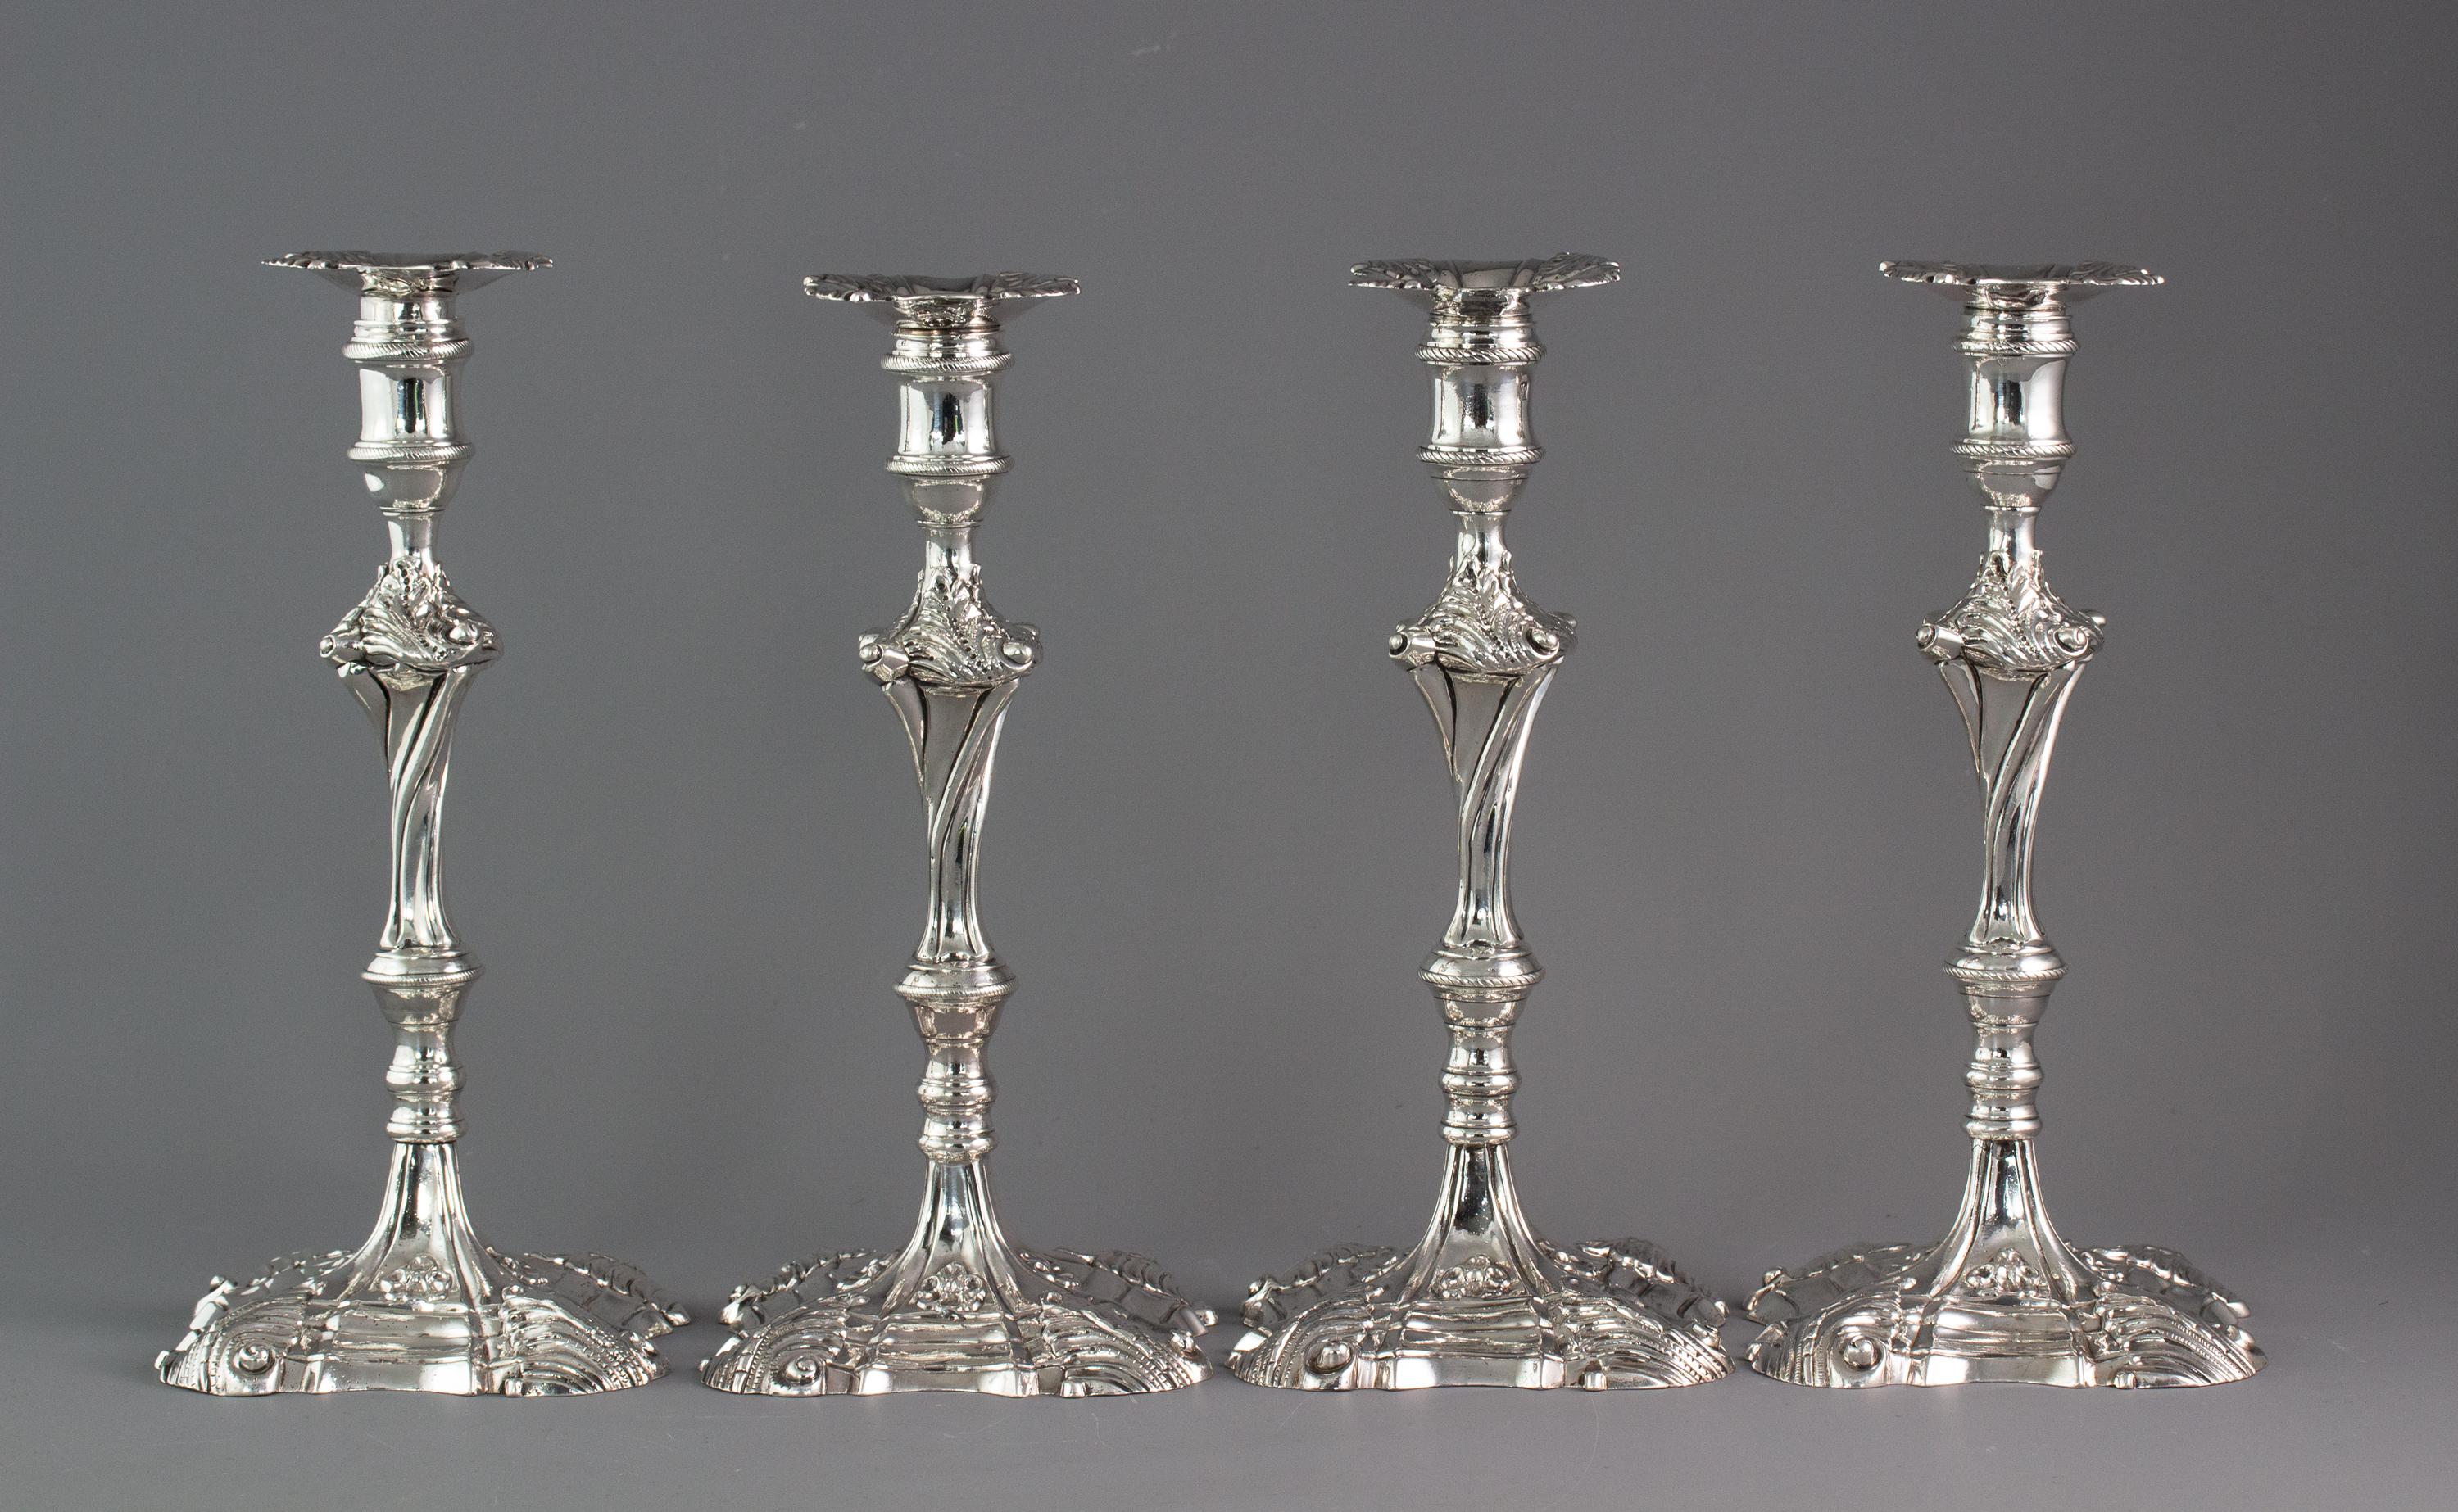 An exceptional set of four cast silver candlesticks, London, 1764-1765

An extremely fine set of four Georgian cast silver table candlesticks with leaf pattern decoration to the square shaped bases. A wrythen stem and leaf pattern and scroll form